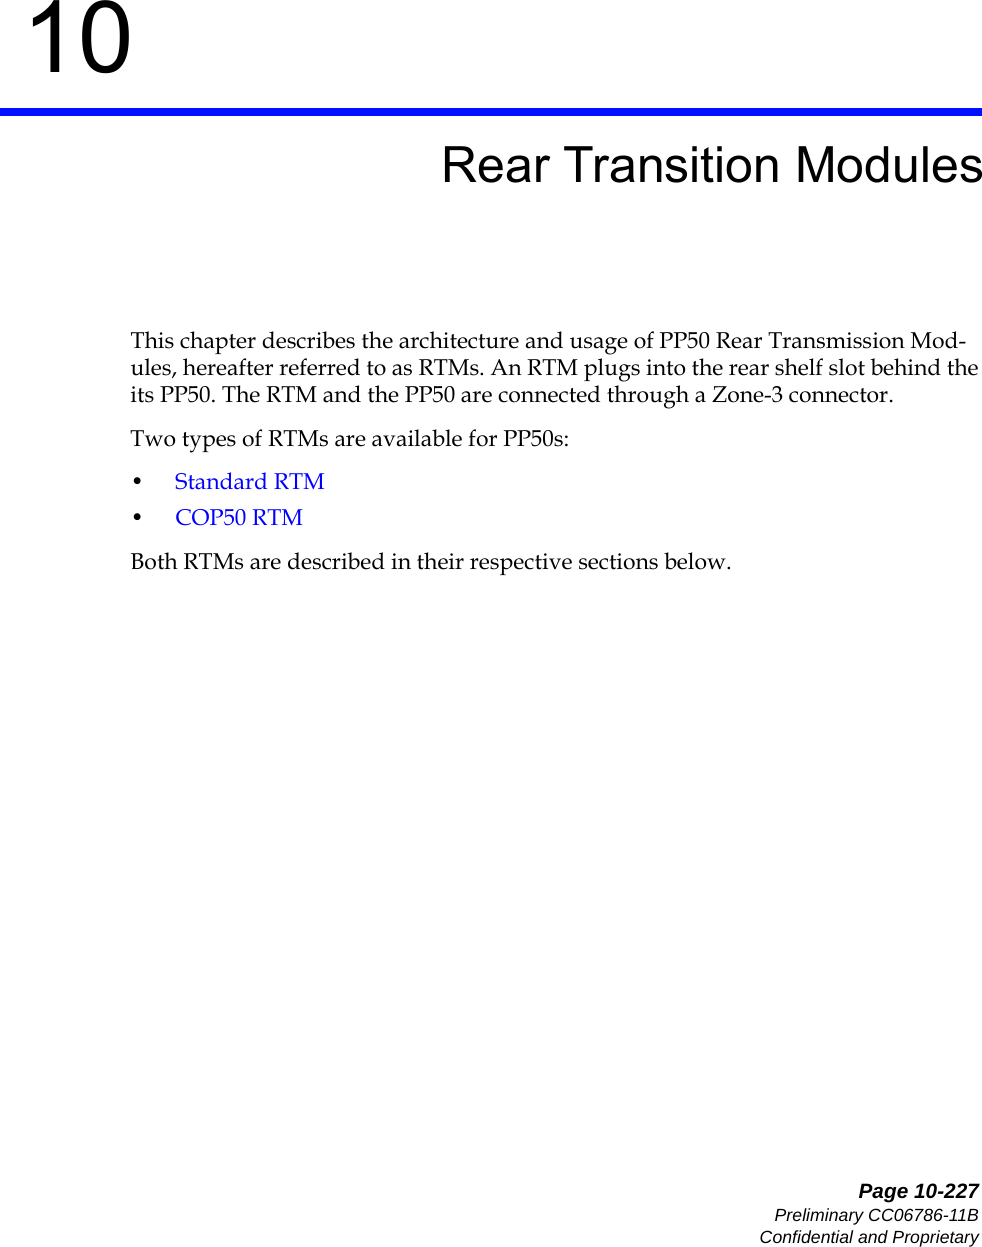   Page 10-227Preliminary CC06786-11BConfidential and Proprietary10Preliminary10Rear Transition ModulesThis chapter describes the architecture and usage of PP50 Rear Transmission Mod-ules, hereafter referred to as RTMs. An RTM plugs into the rear shelf slot behind the its PP50. The RTM and the PP50 are connected through a Zone-3 connector. Two types of RTMs are available for PP50s: •Standard RTM•COP50 RTMBoth RTMs are described in their respective sections below.